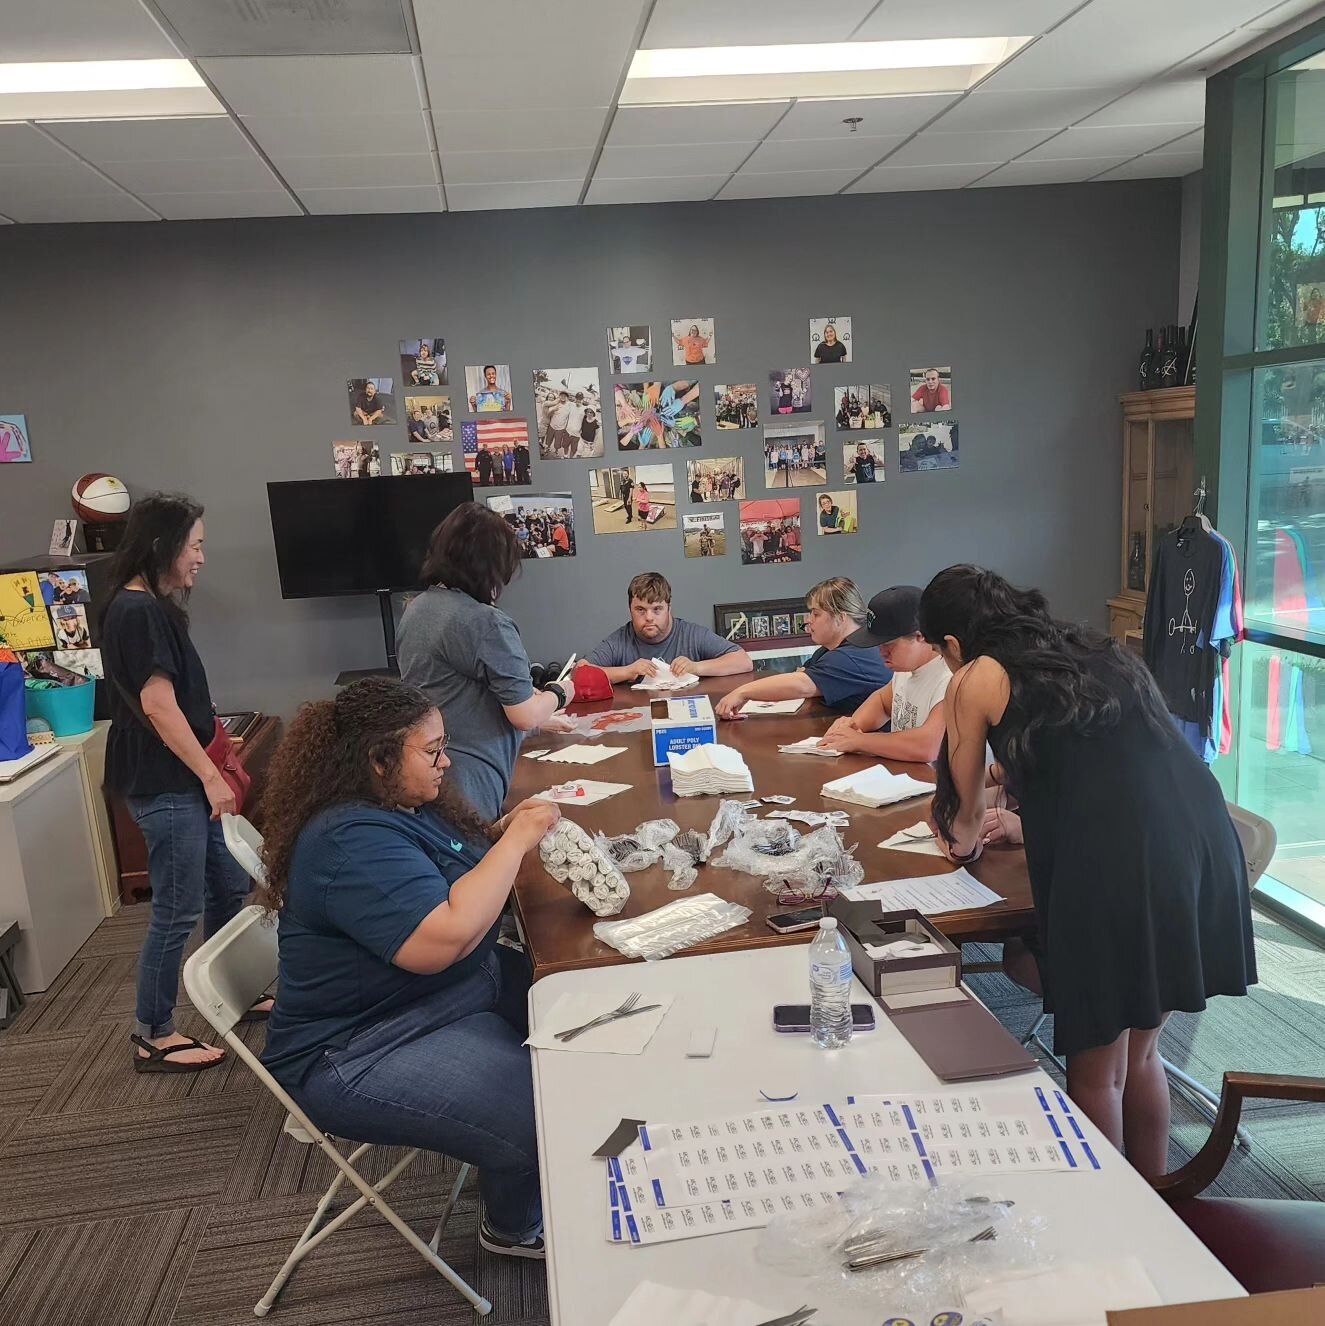 COMMUNITY is one of @abc_hopes' core values. 

Ensuring we give back, stay engaged, and support our community makes us all better. 

This afternoon, our participants, team, and parents assisted in rolling silverware for the @rotaryclubcorona 2023 Lob